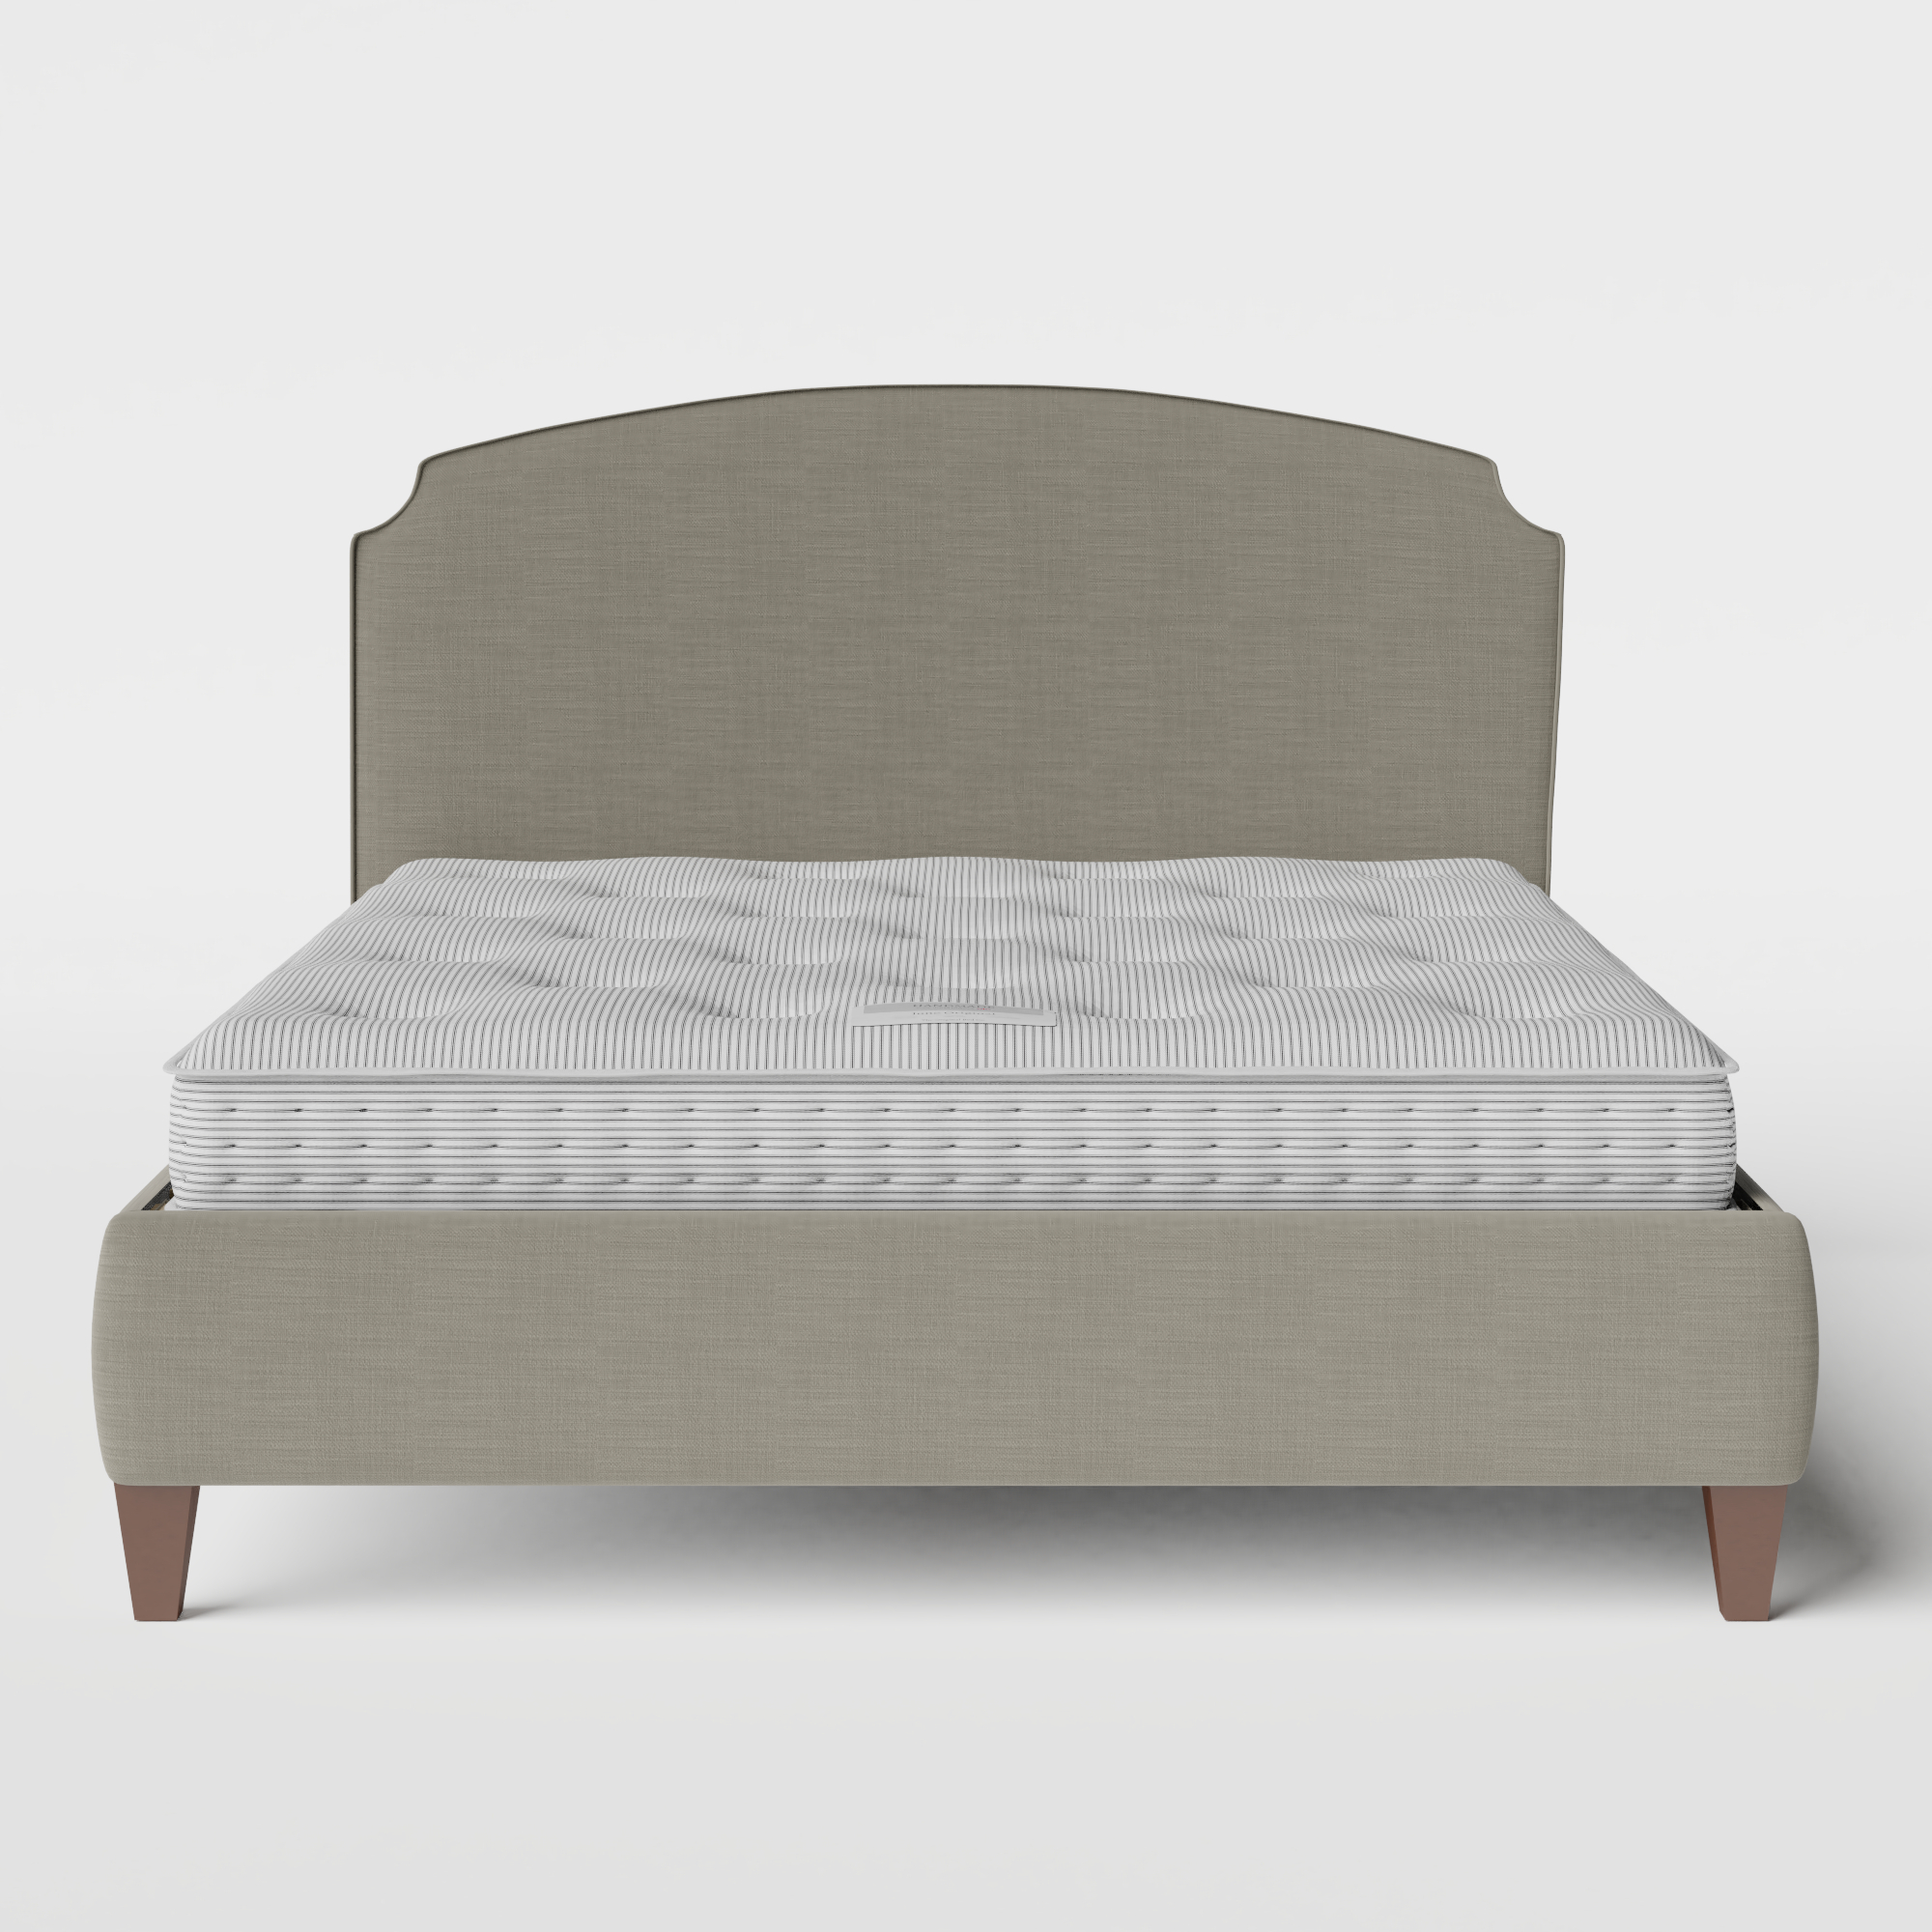 Lide with Piping upholstered bed in grey fabric with Juno mattress